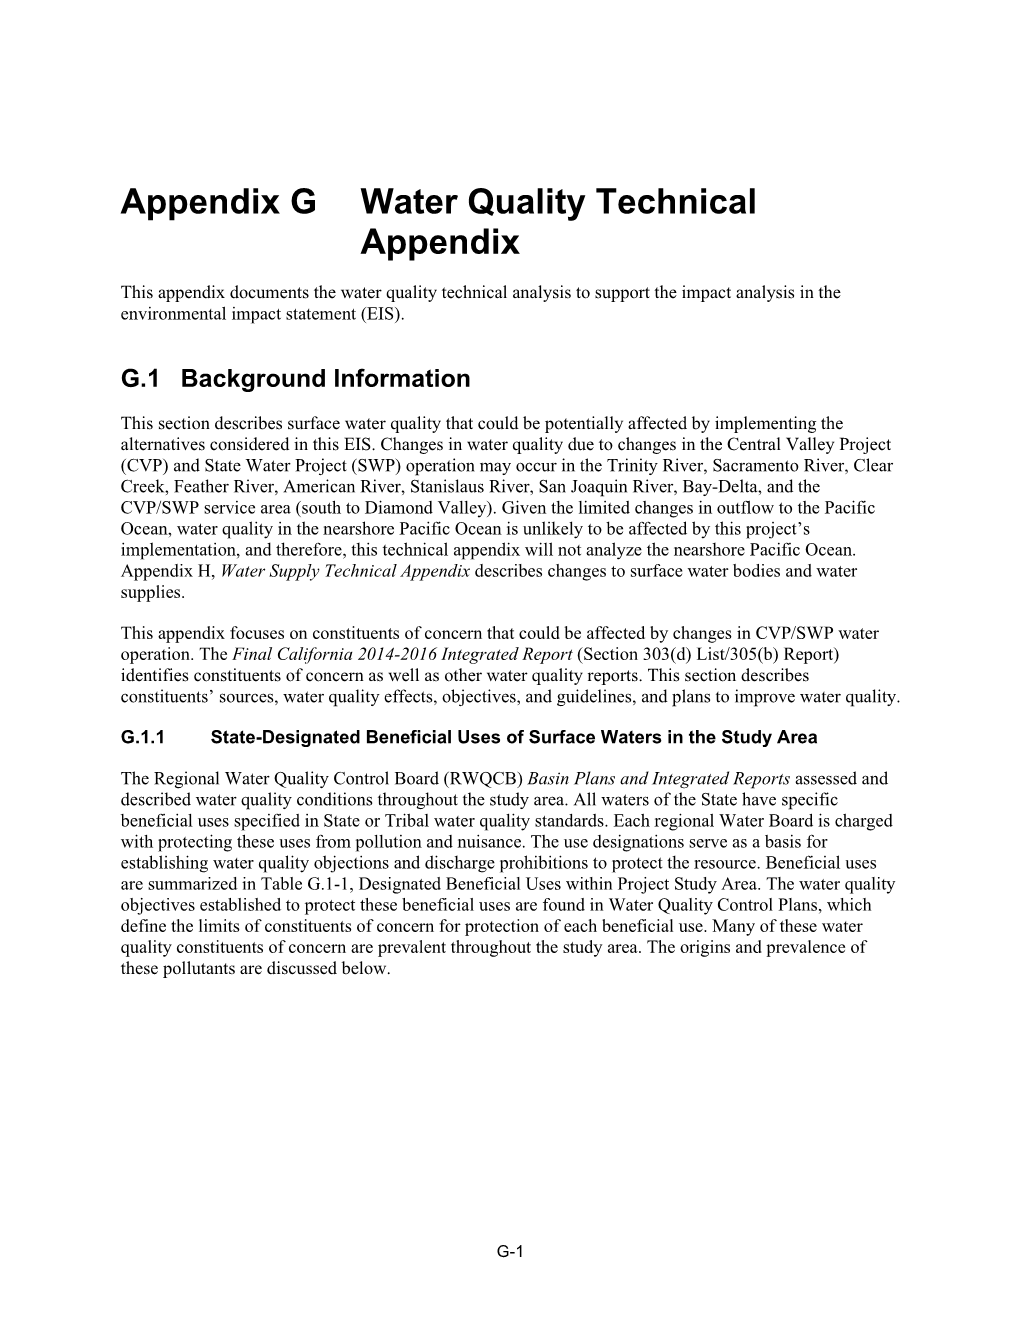 Appendix G: Water Quality Technical A